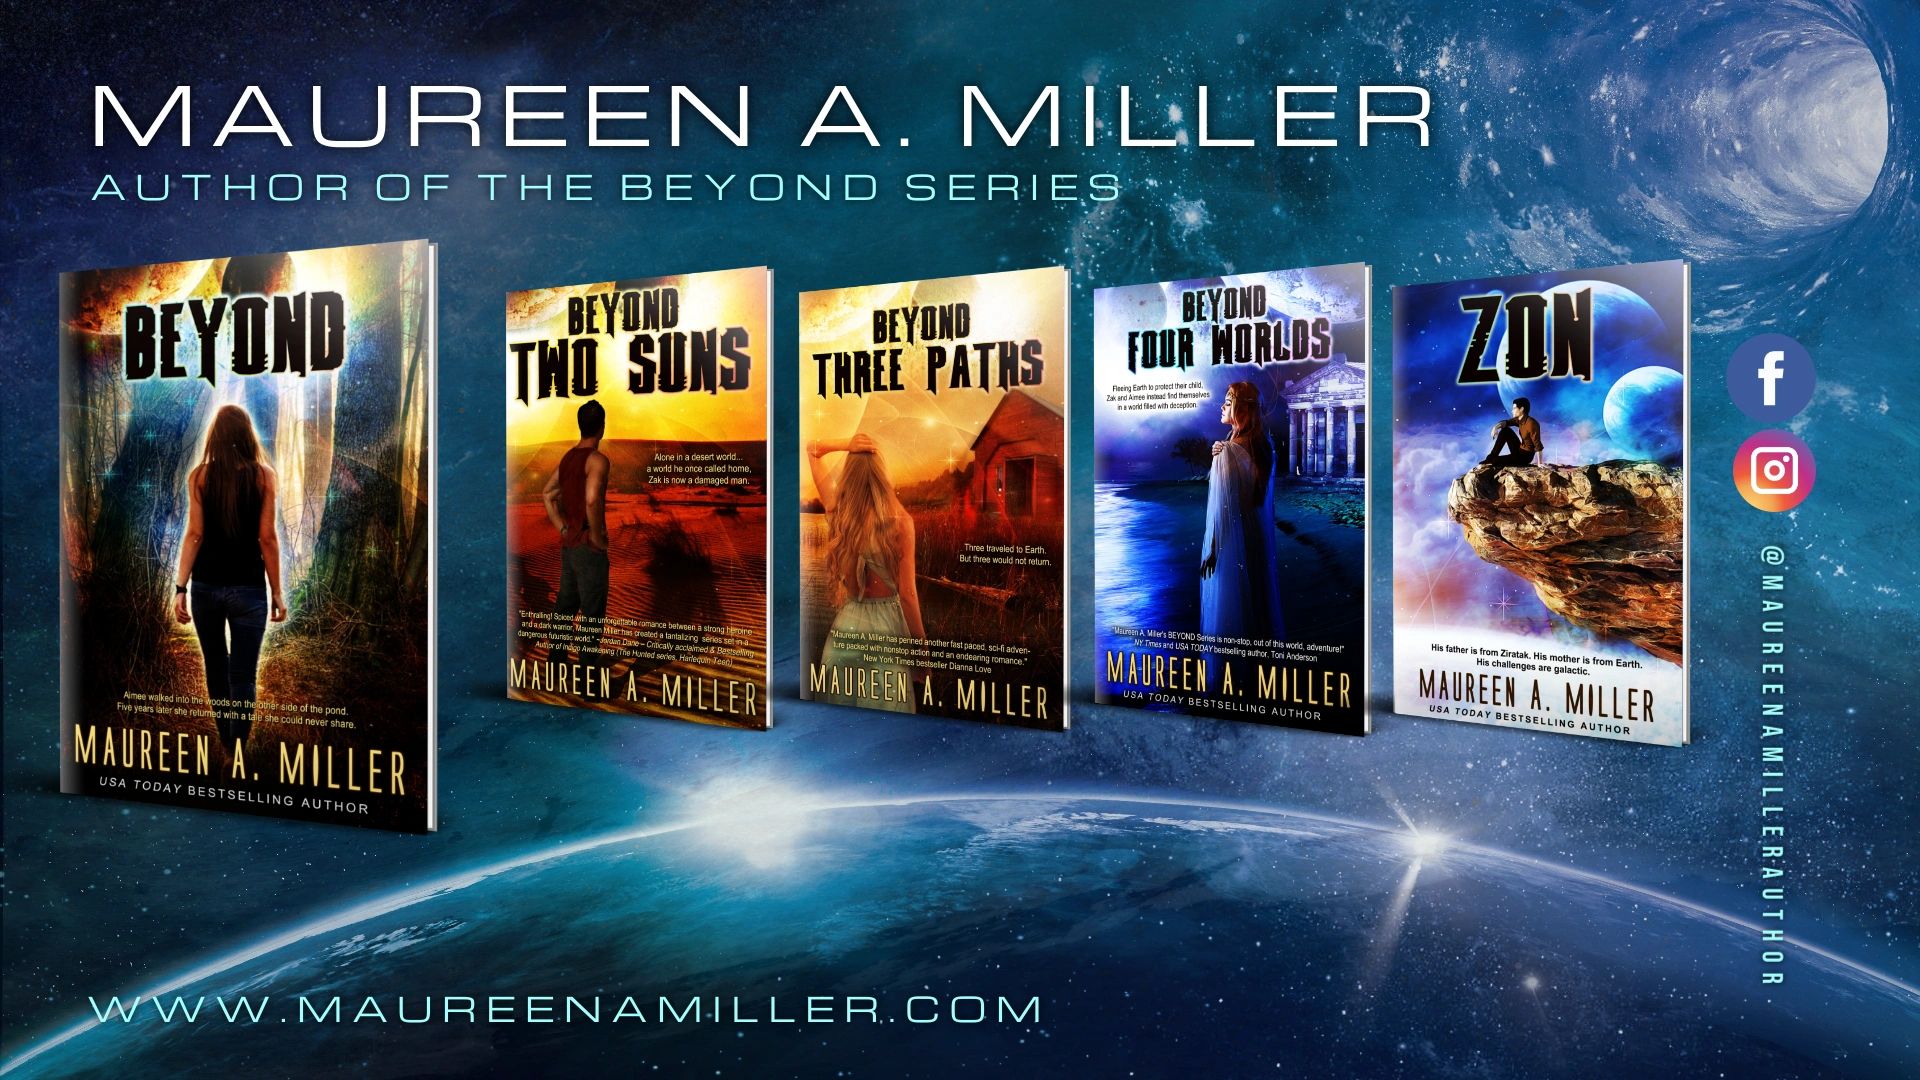 BEYOND series book covers from Maureen A. Miller. Outer space background.